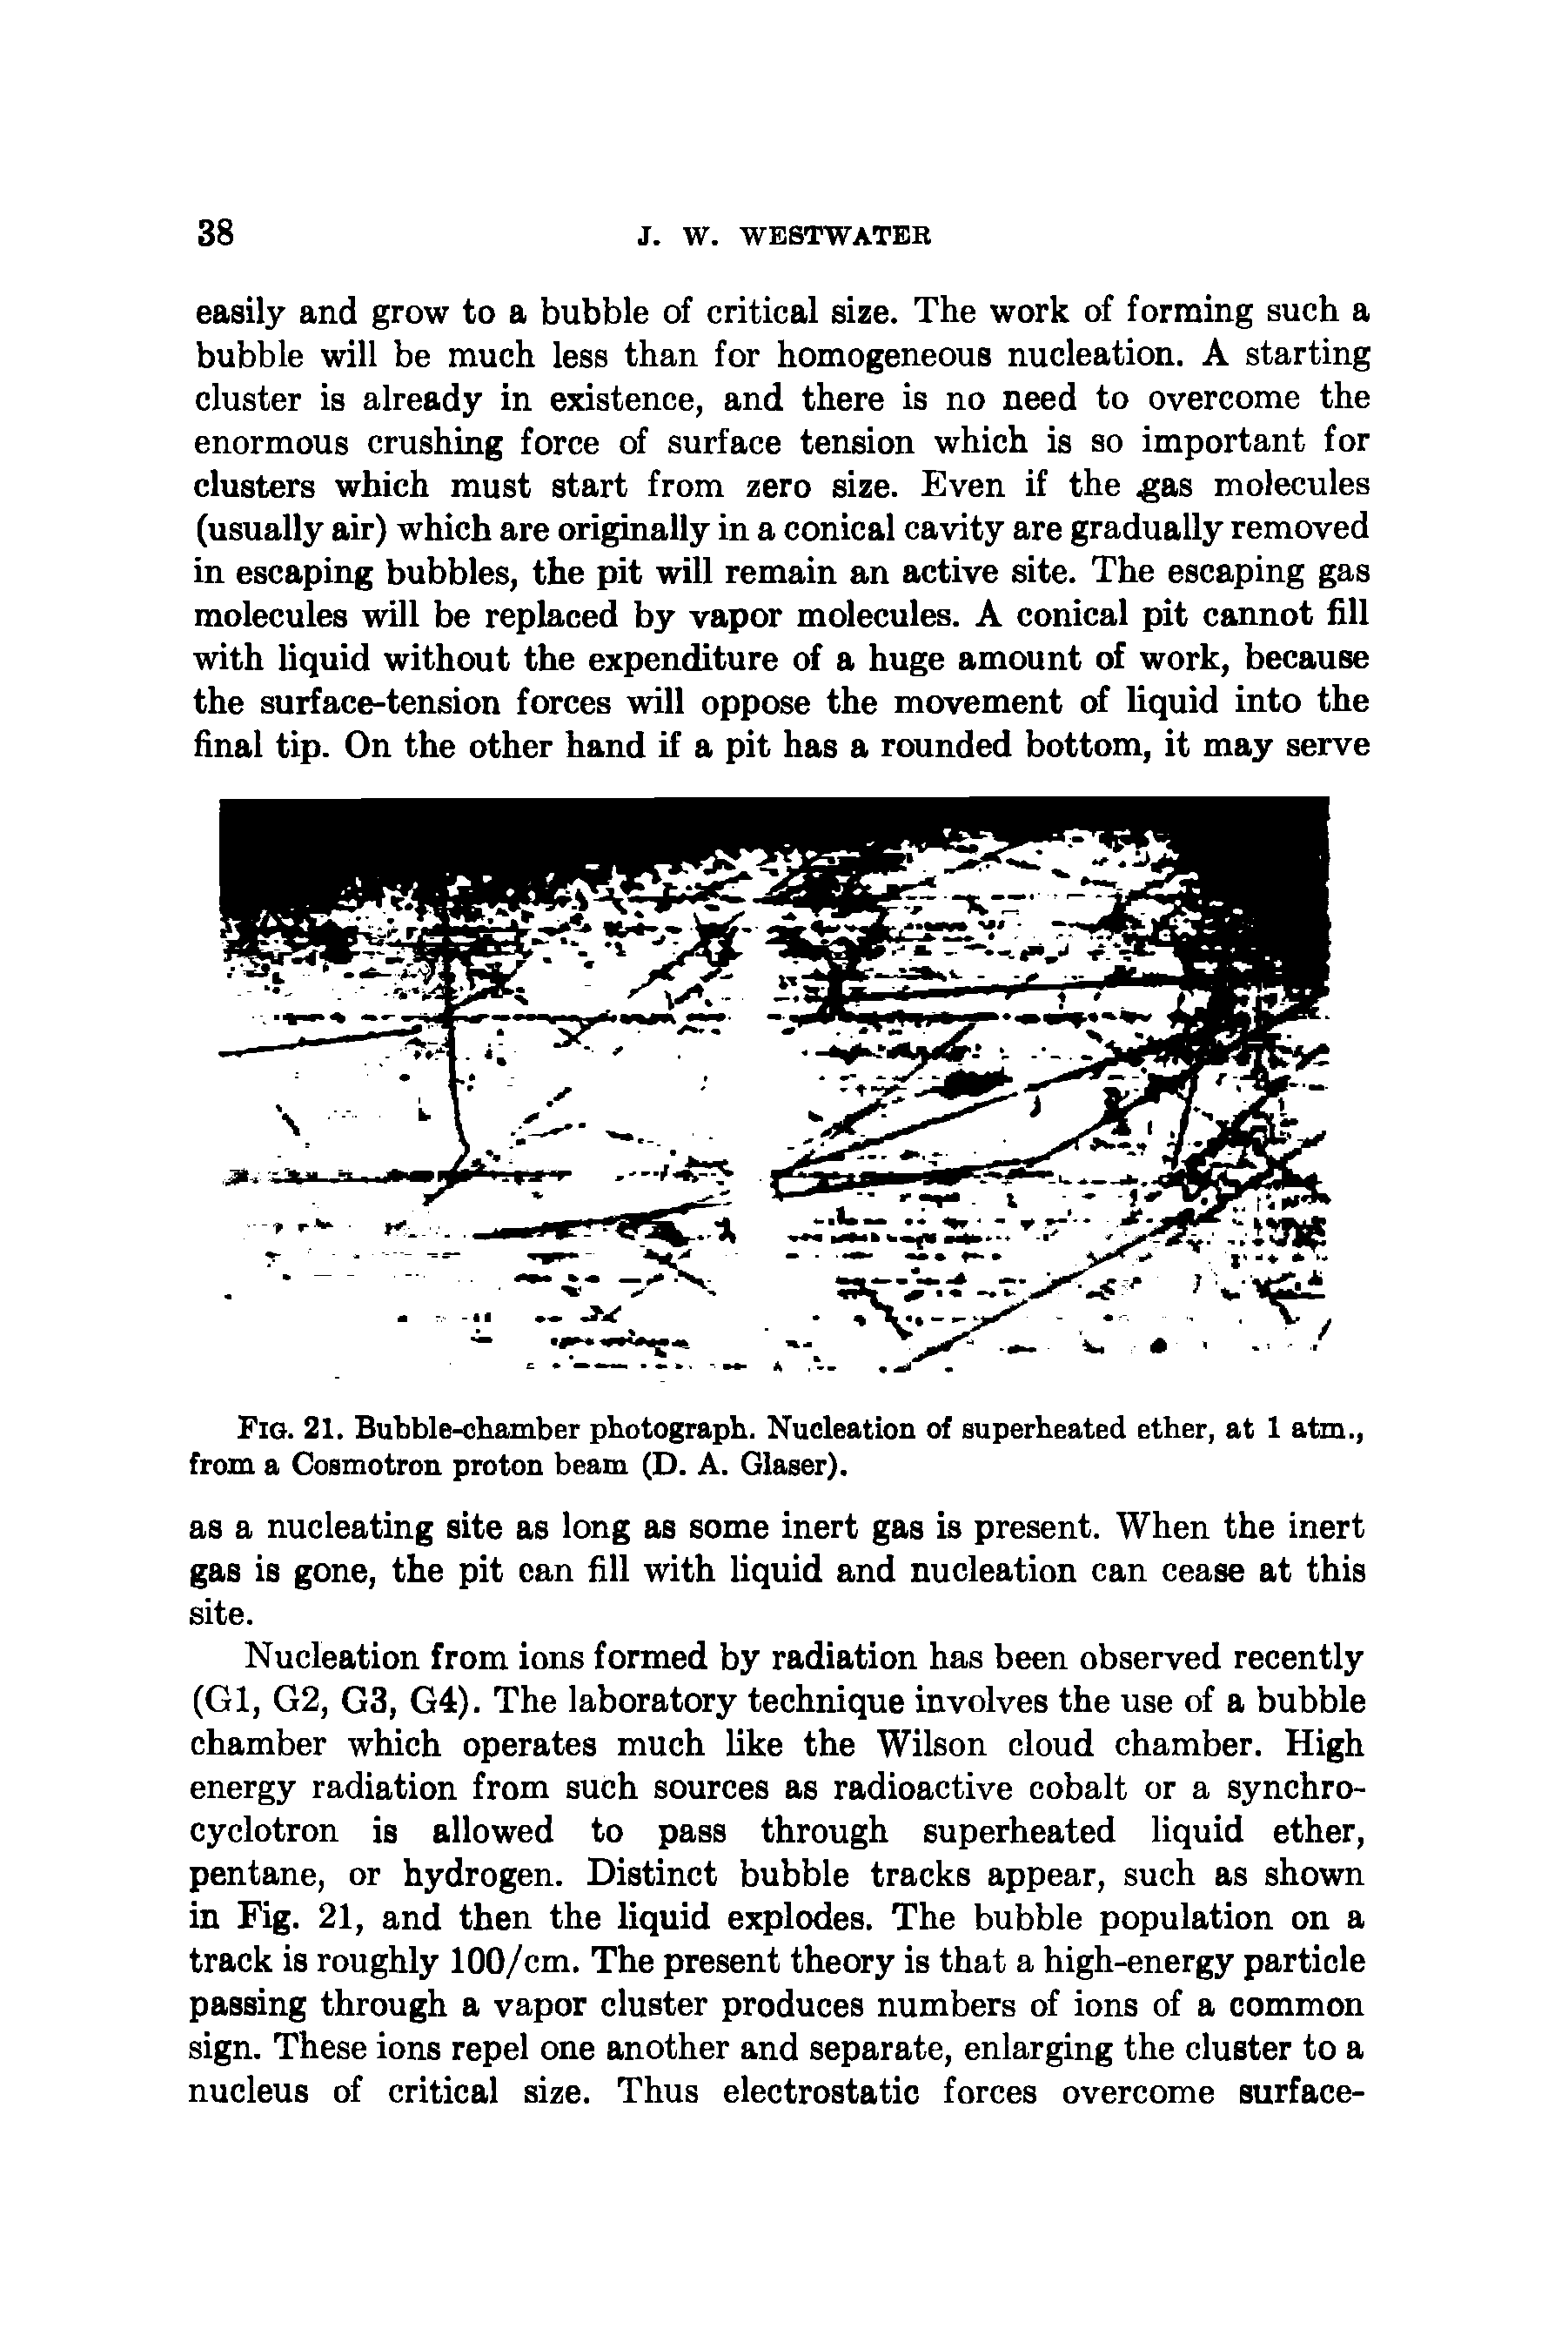 Fig. 21. Bubble-chamber photograph. Nucleation of superheated ether, at 1 atm., from a Cosmotron proton beam (D. A. Glaser).